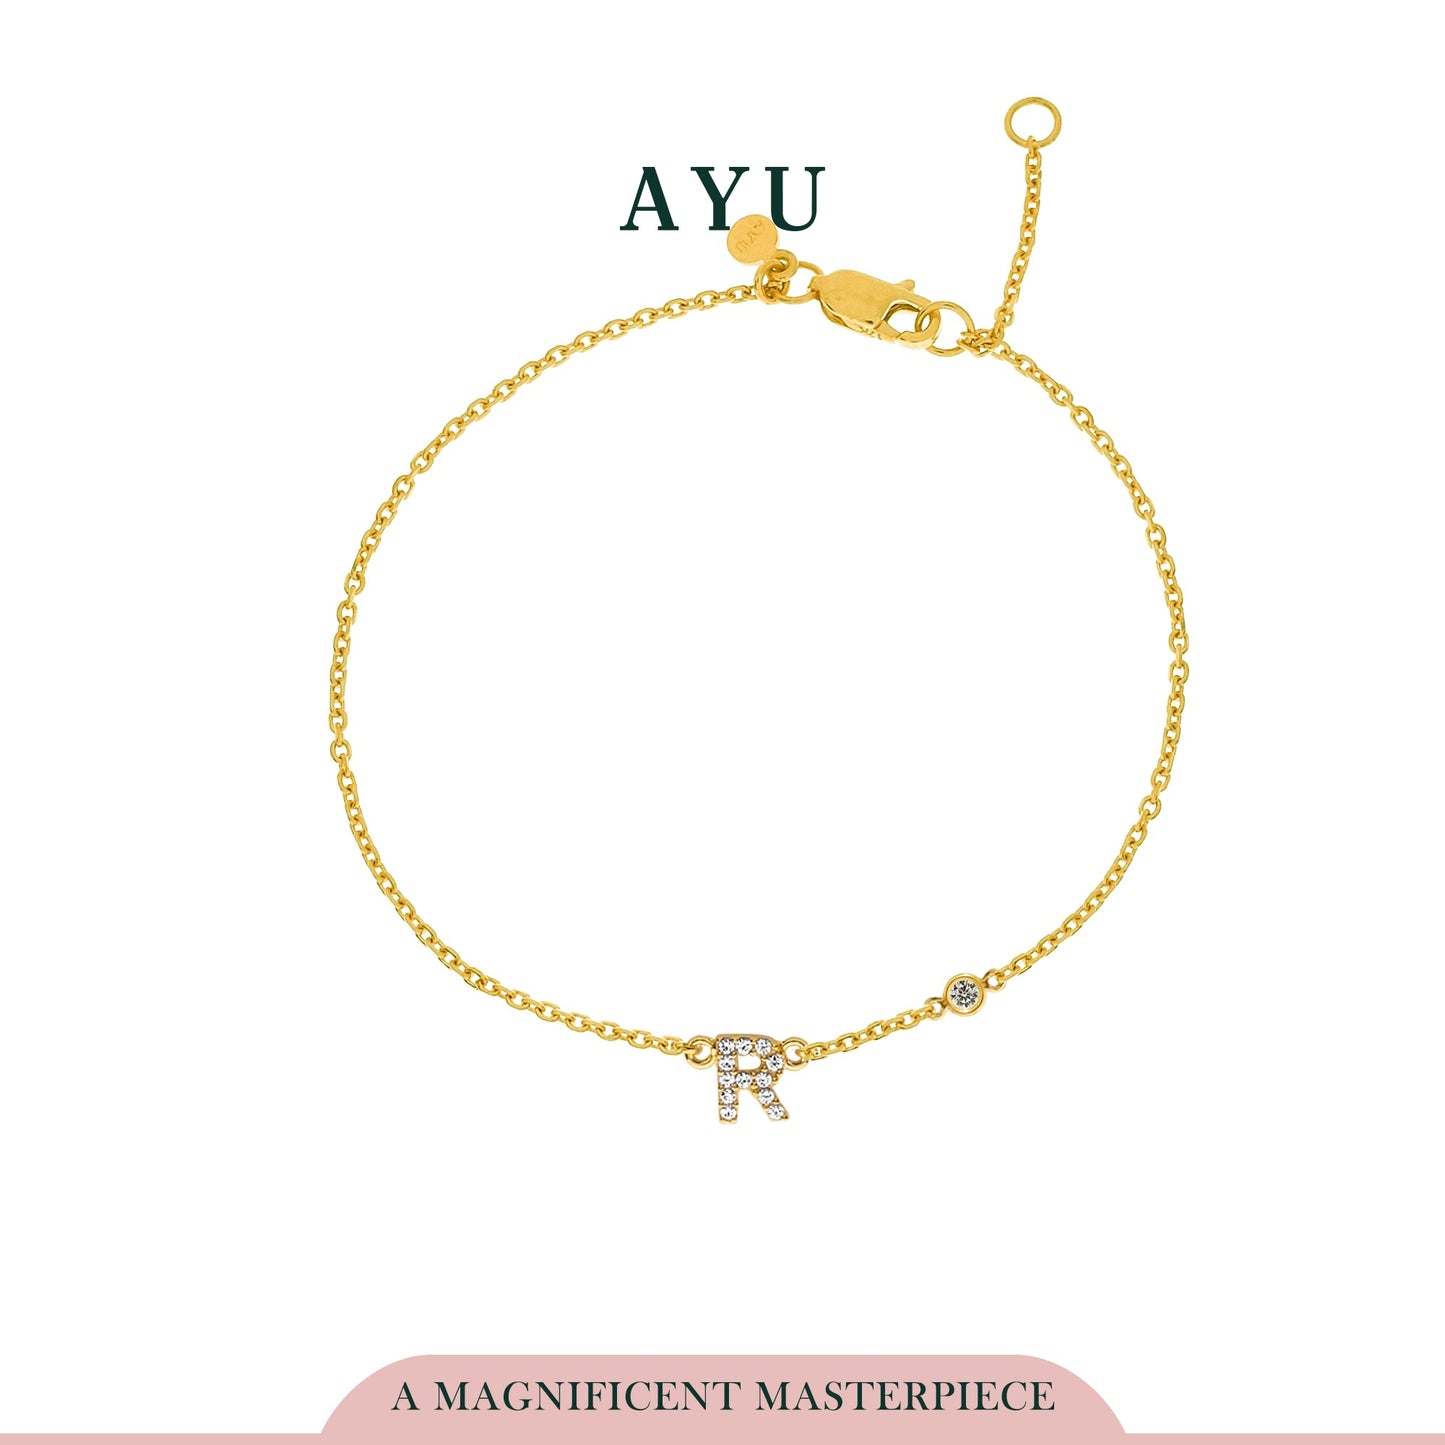 AYU PAVE INITIAL WITH BEZEL CHAIN BRACELET 16K YELLOW GOLD